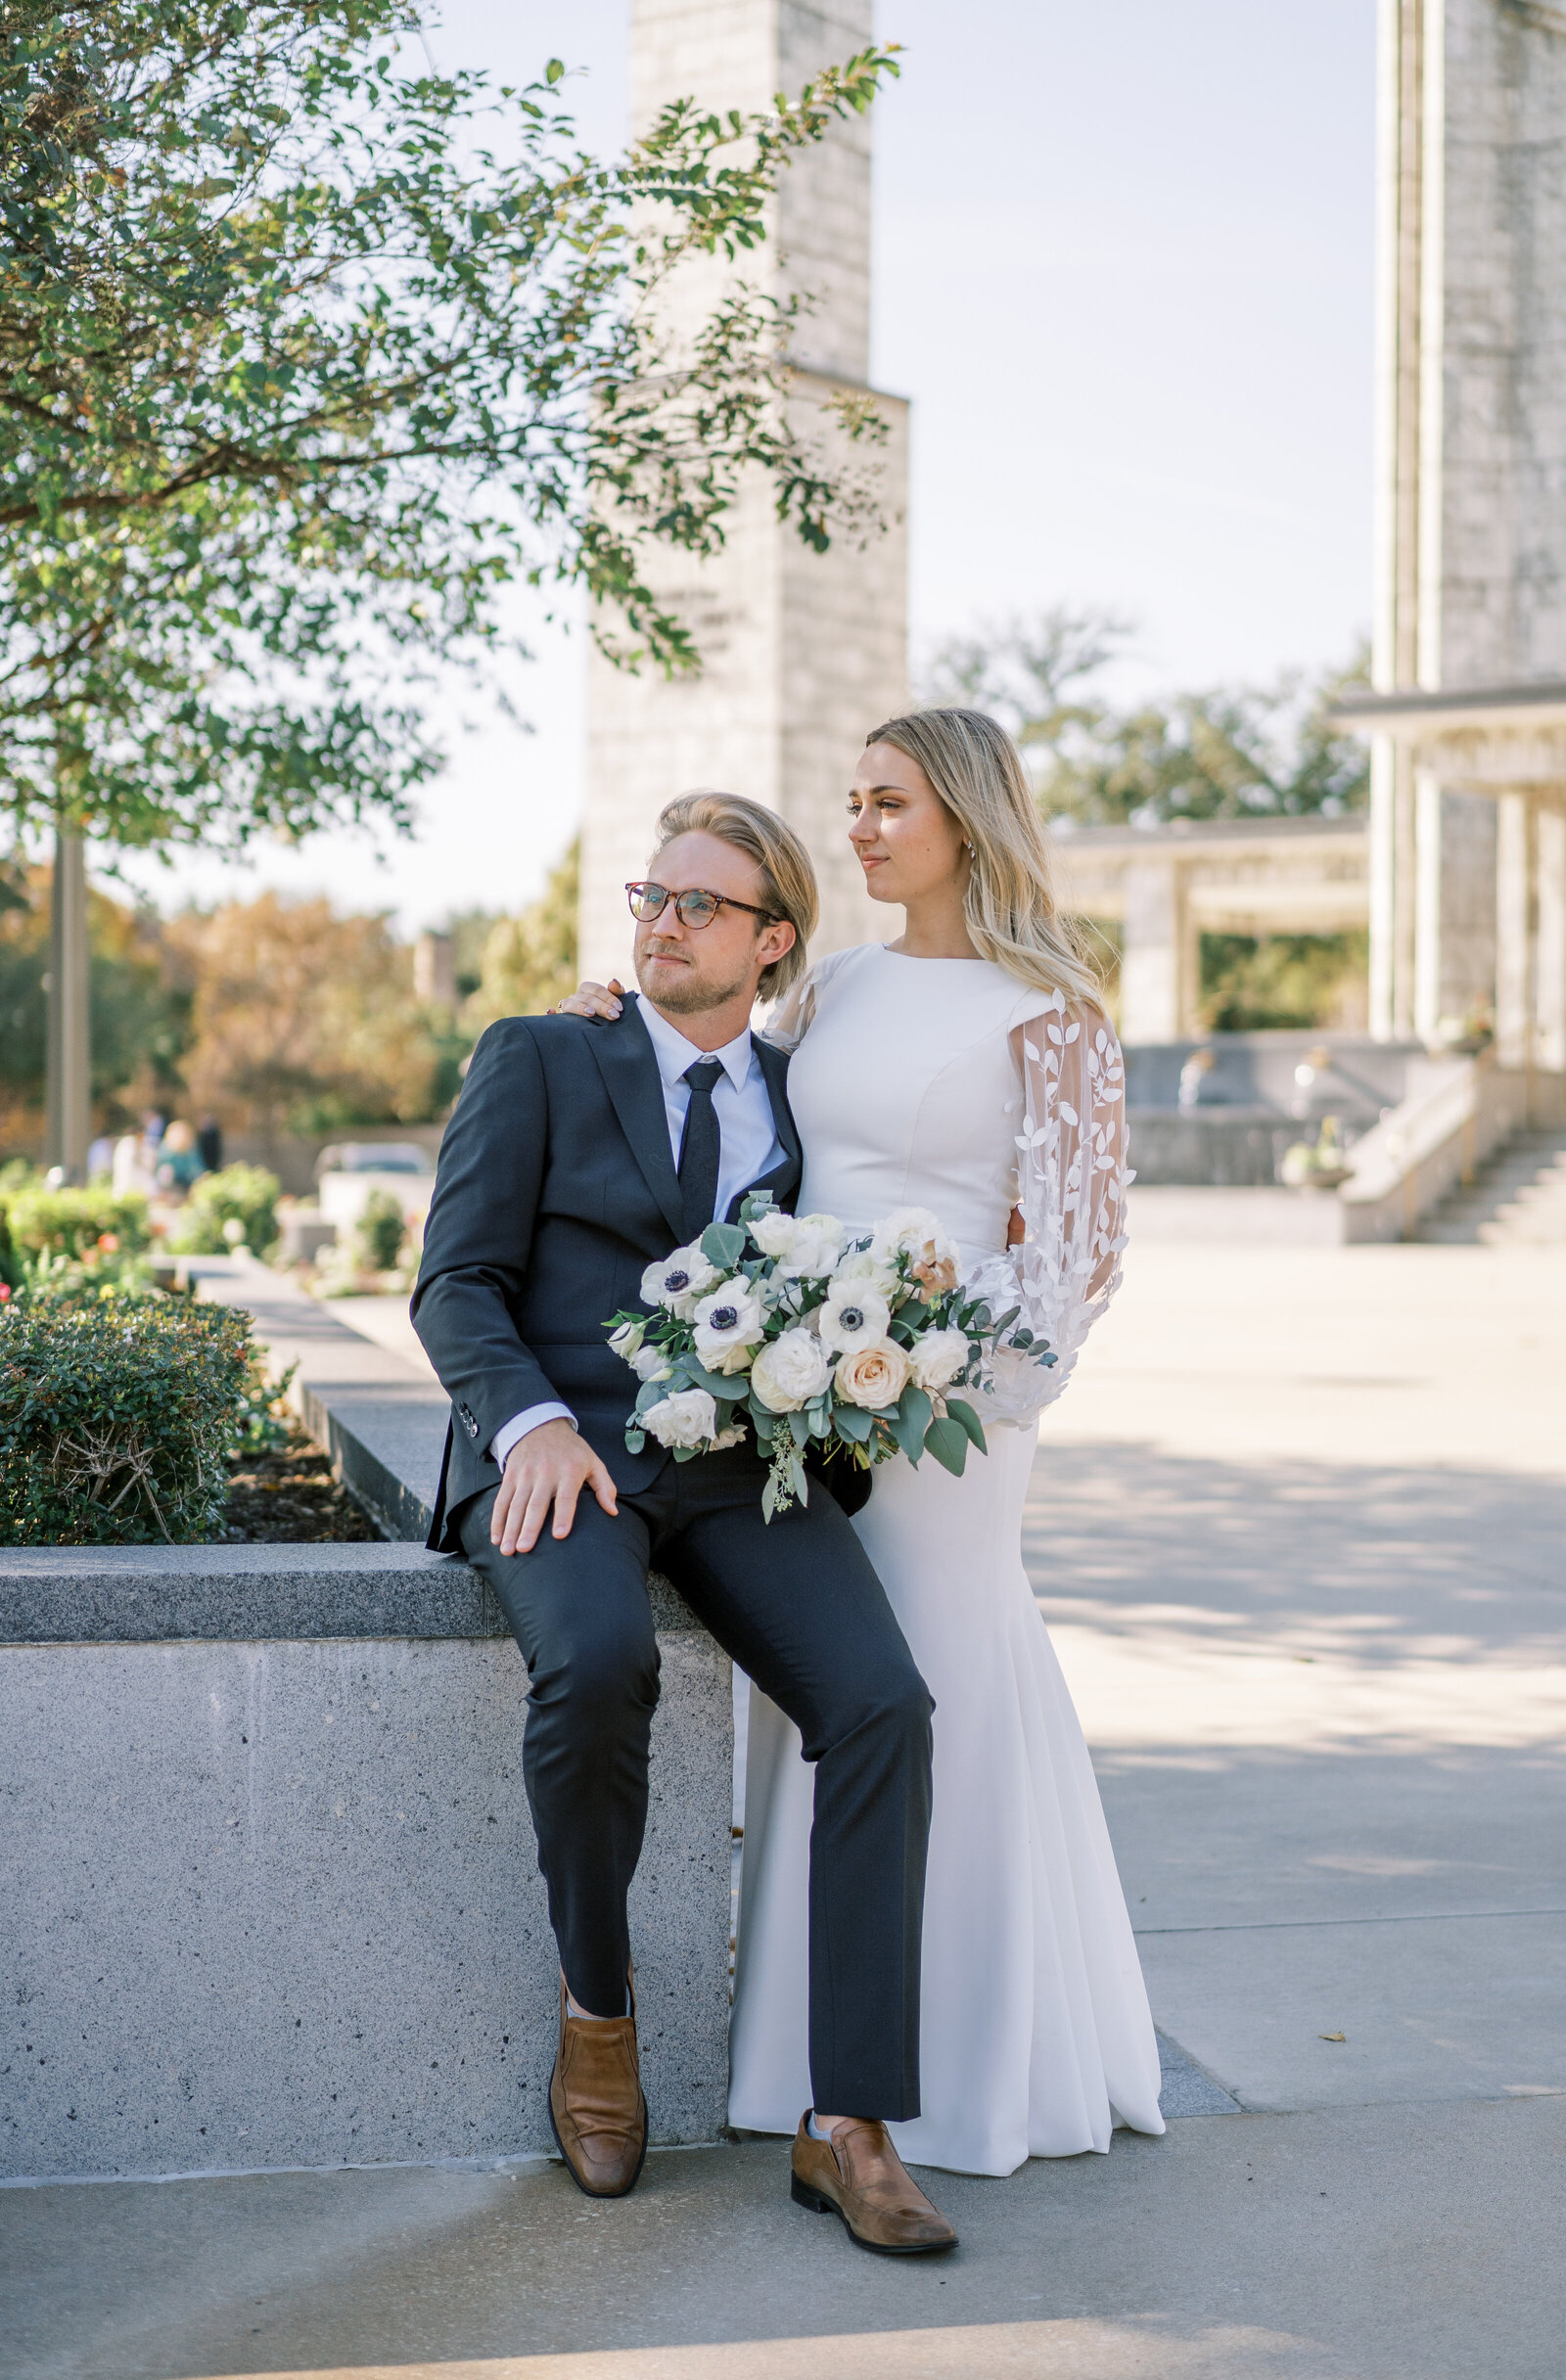 Portrait of bride and groom in a white wedding gown and black suit sitting by a garden in a courtyard.